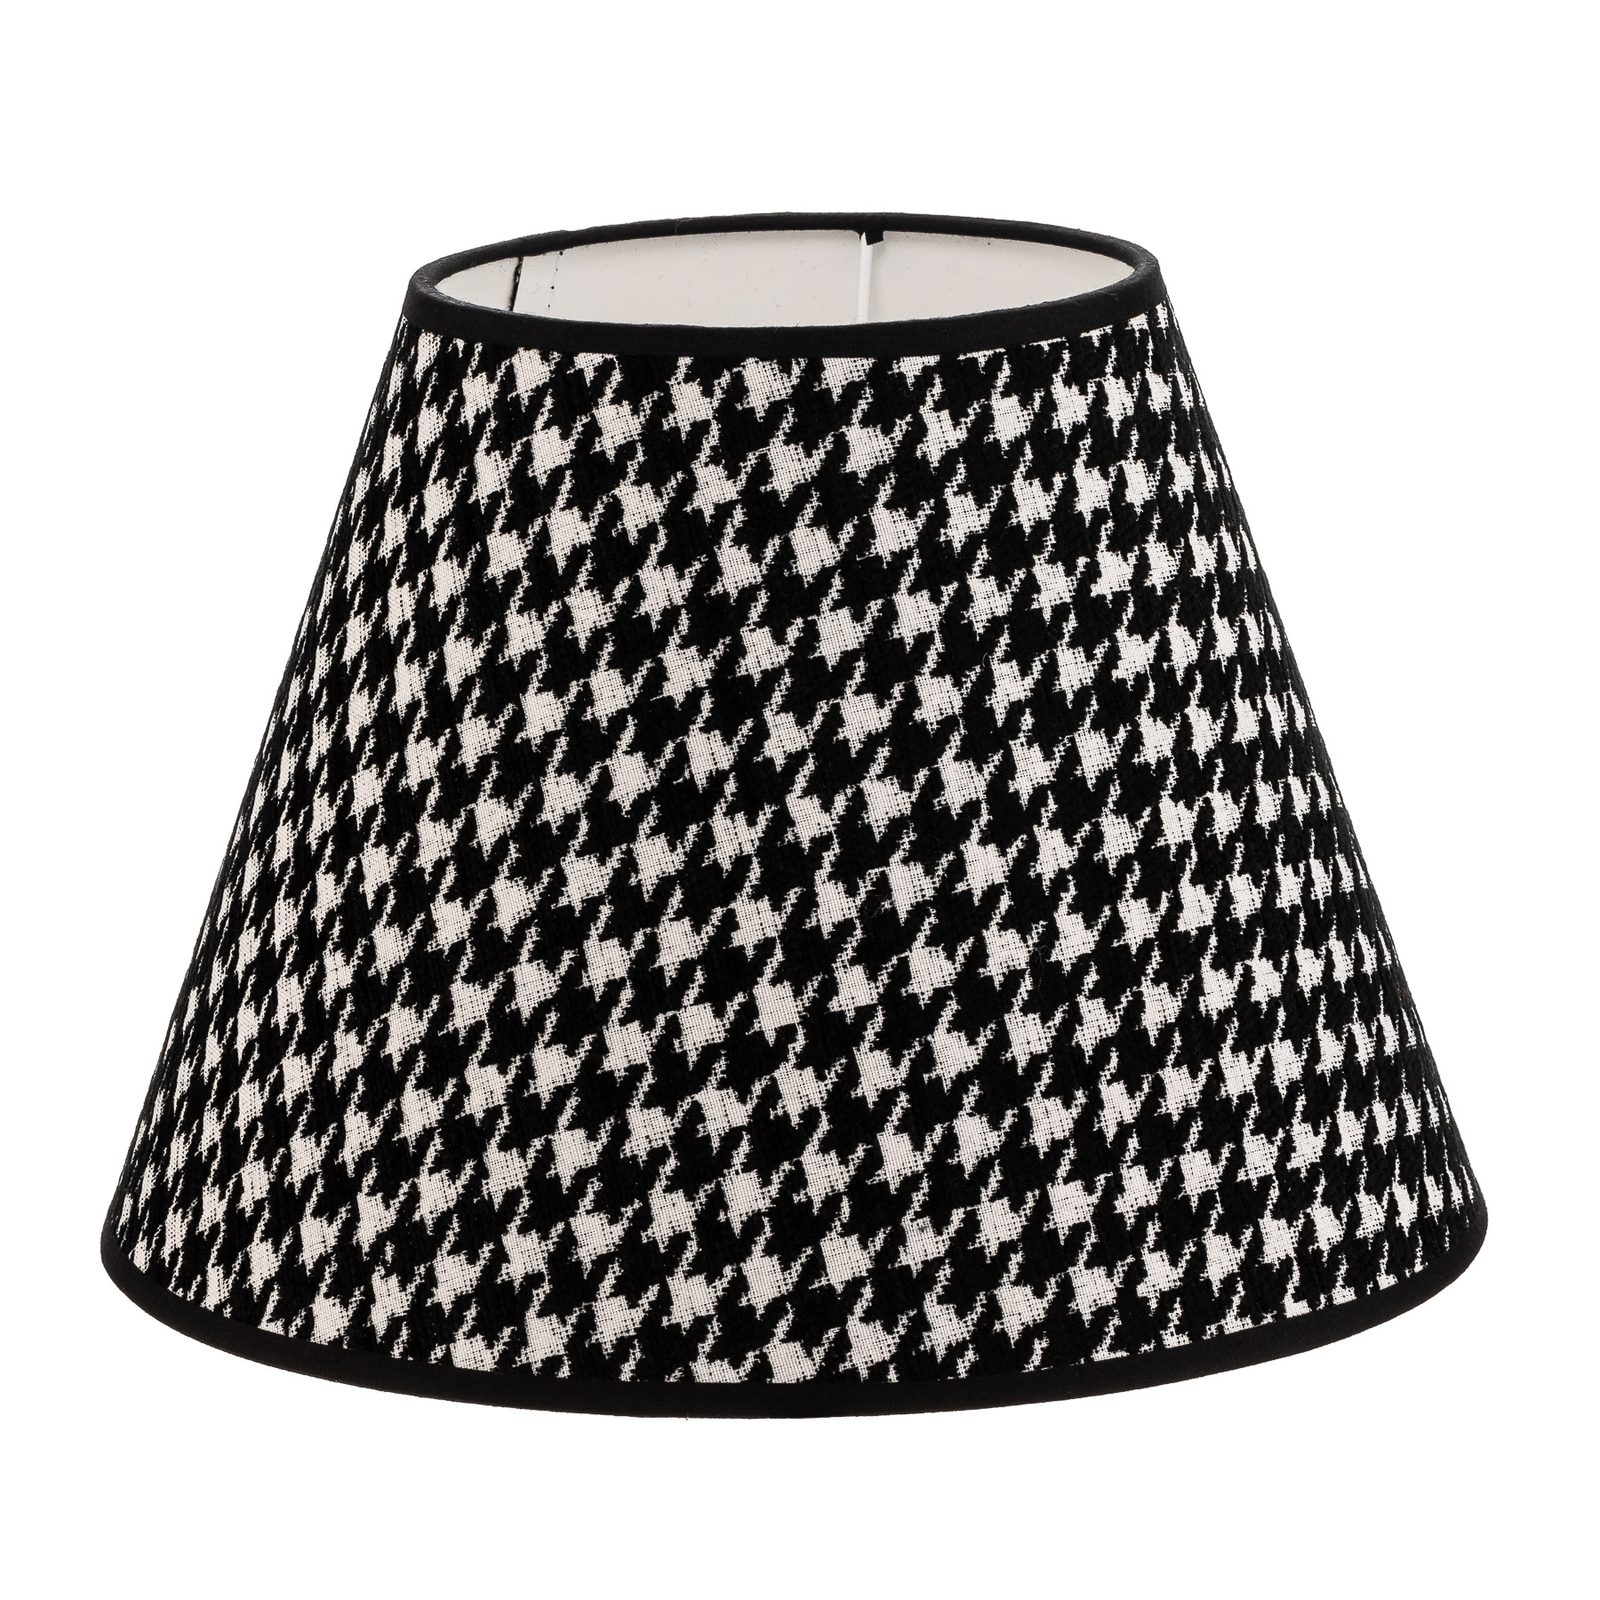 Sofia lampshade 21 cm, houndstooth pattern black